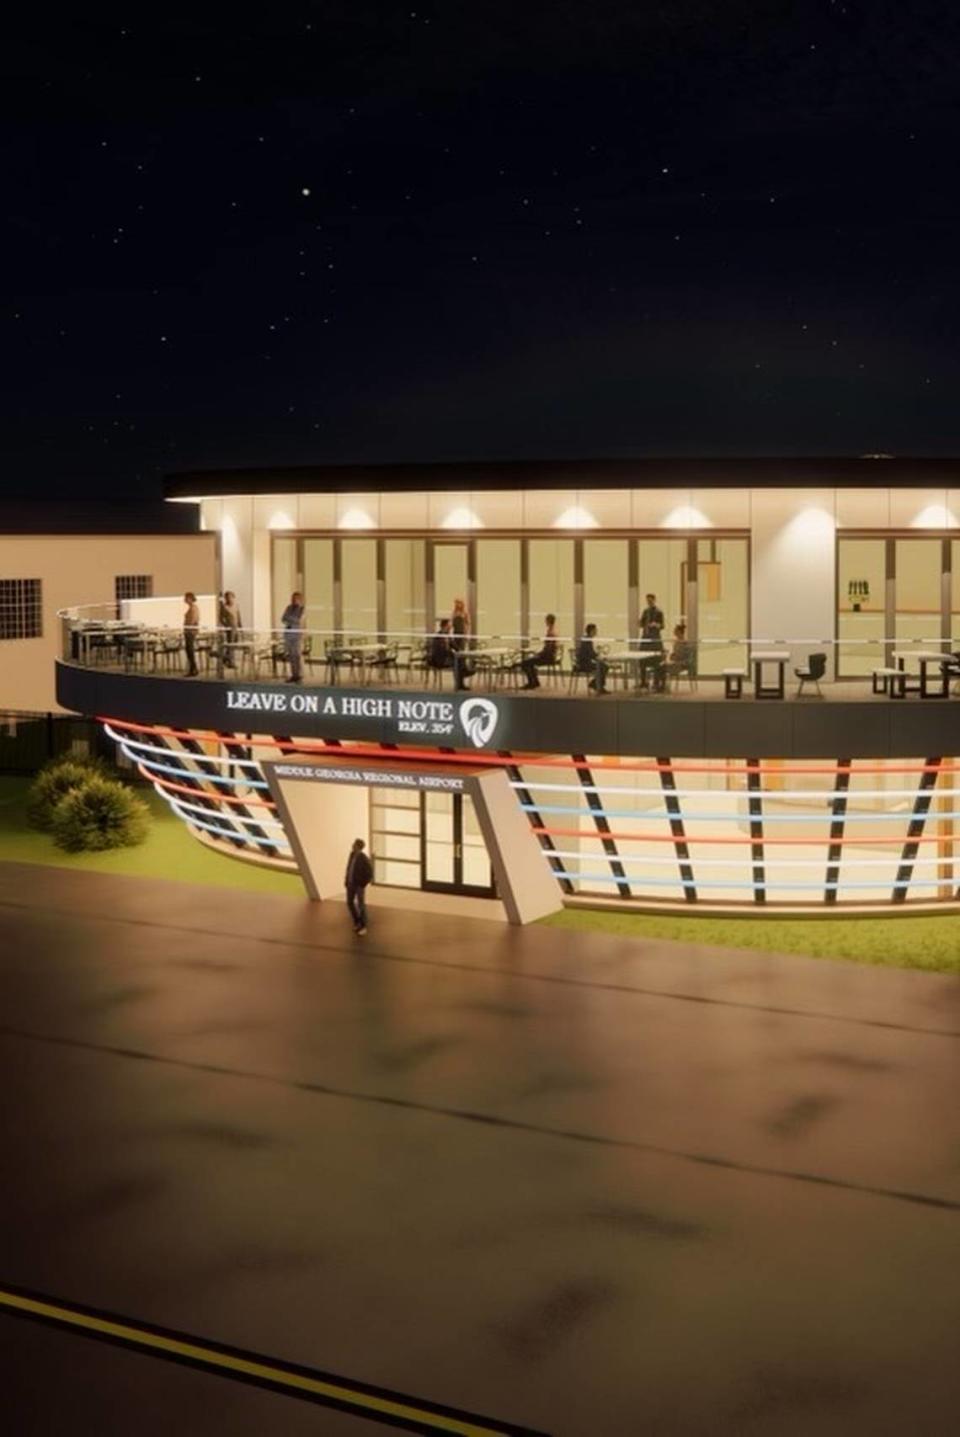 Macon-Bibb County revealed the plans for a new executive terminal at the Middle Georgia Regional Airport that will look like a guitar from the sky to commemorate Macon’s musical heritage.